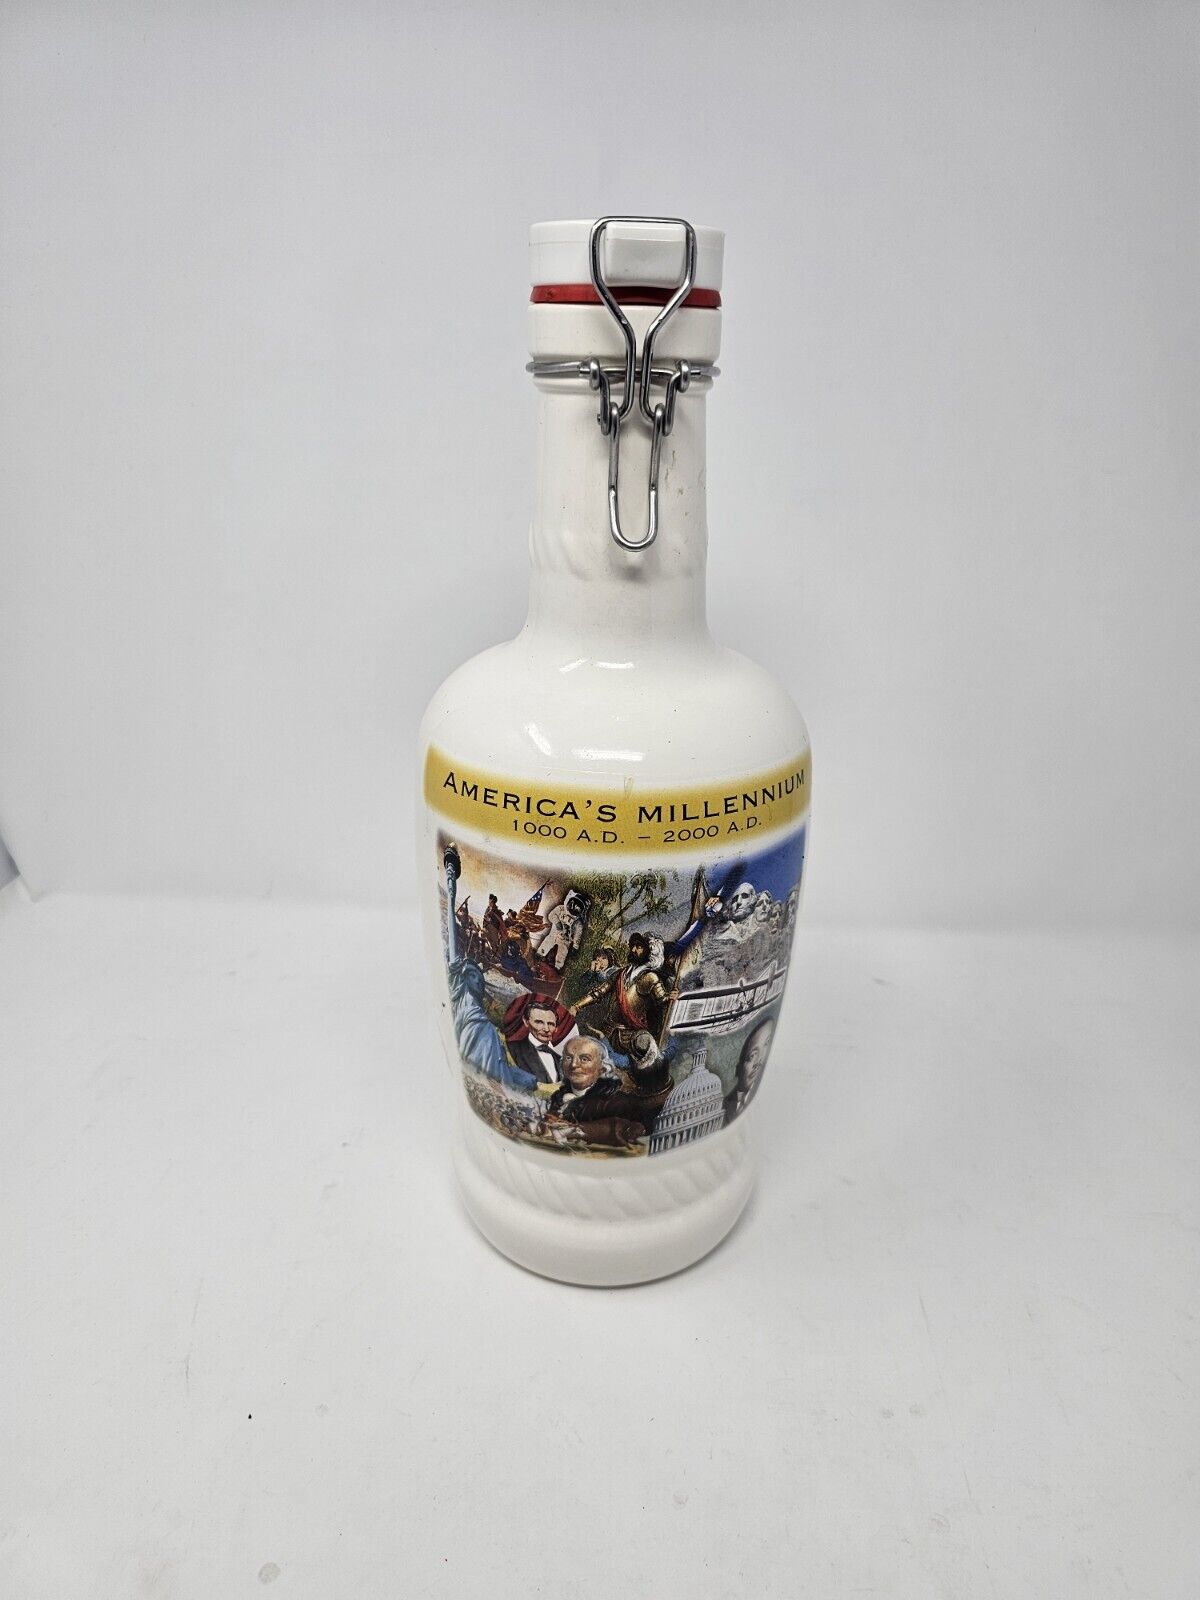 “ AMERICA’S MILLENNIUM” 2000 A.D. CERAMIC BEER BOTTLE, LIMITED EDITION, GERMANY 